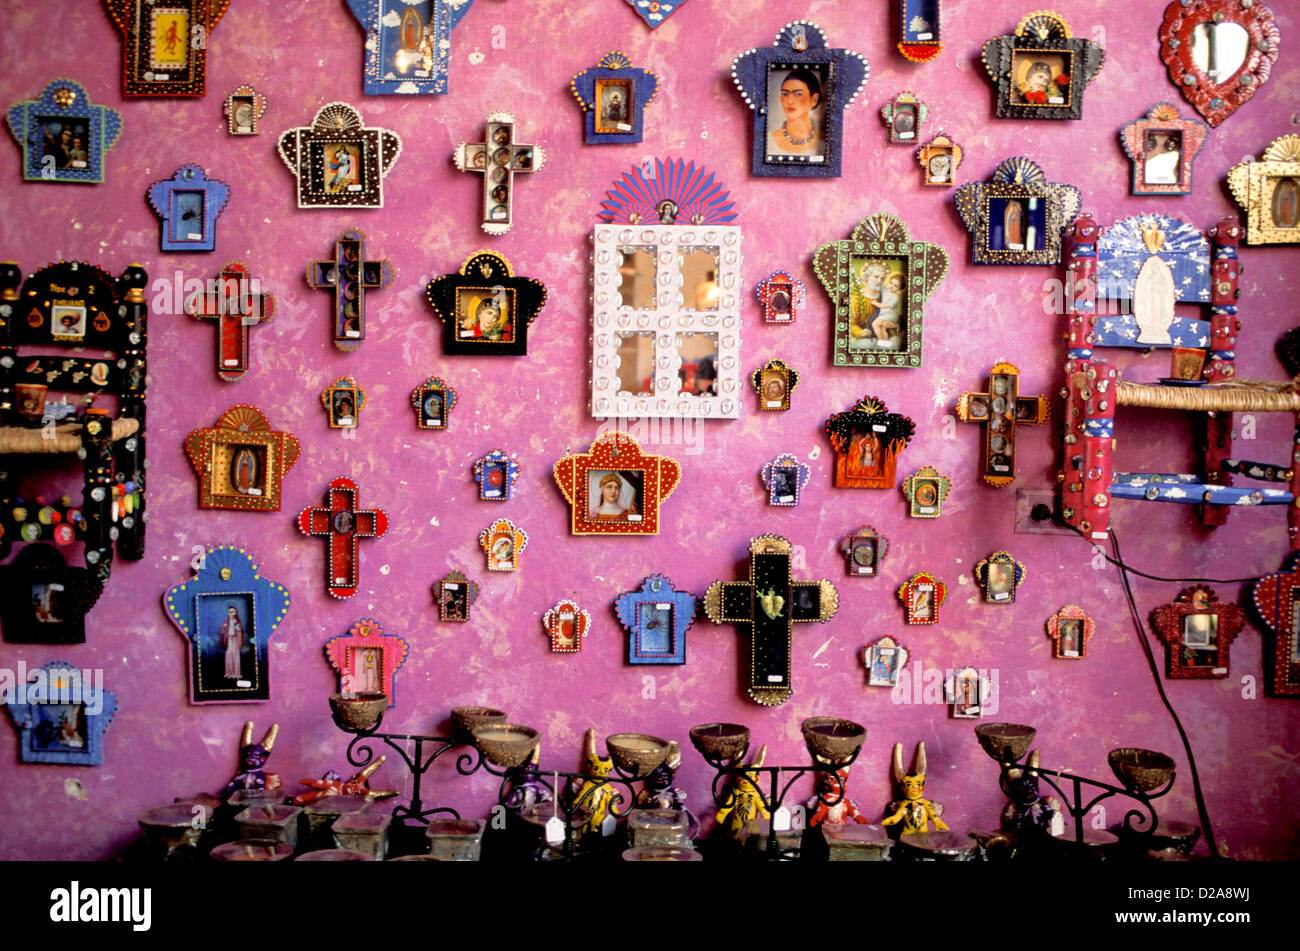 Mexico, San Miguel De Allende. Small Miniatures, Icons, Art Work, And Candleholders Placed On A Wall. Stock Photo